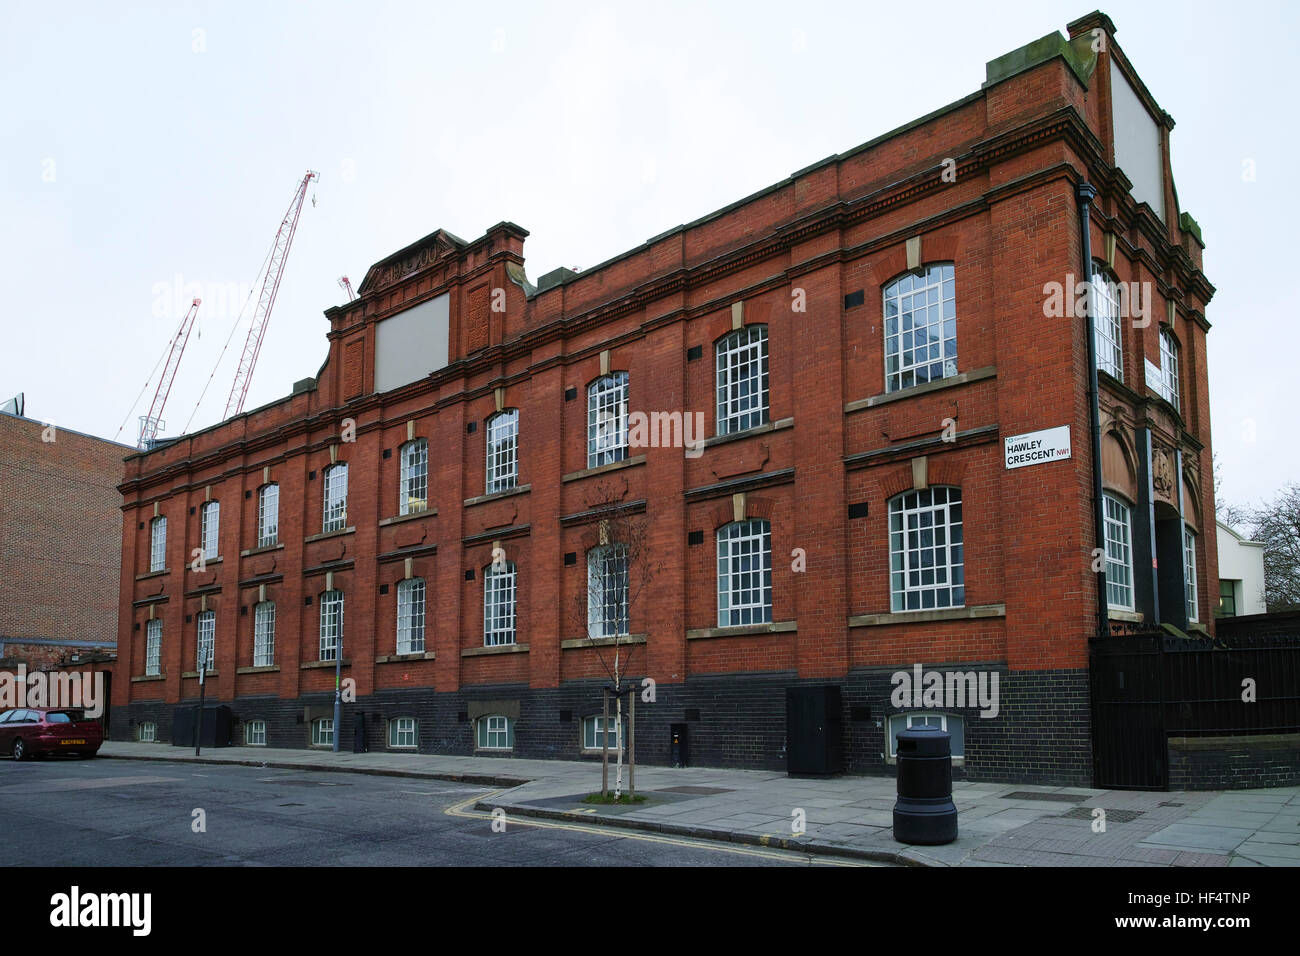 The Elephant House building, Hawley Crescent, Camden Town, the former Elephant Brewery now converted to offices. Stock Photo